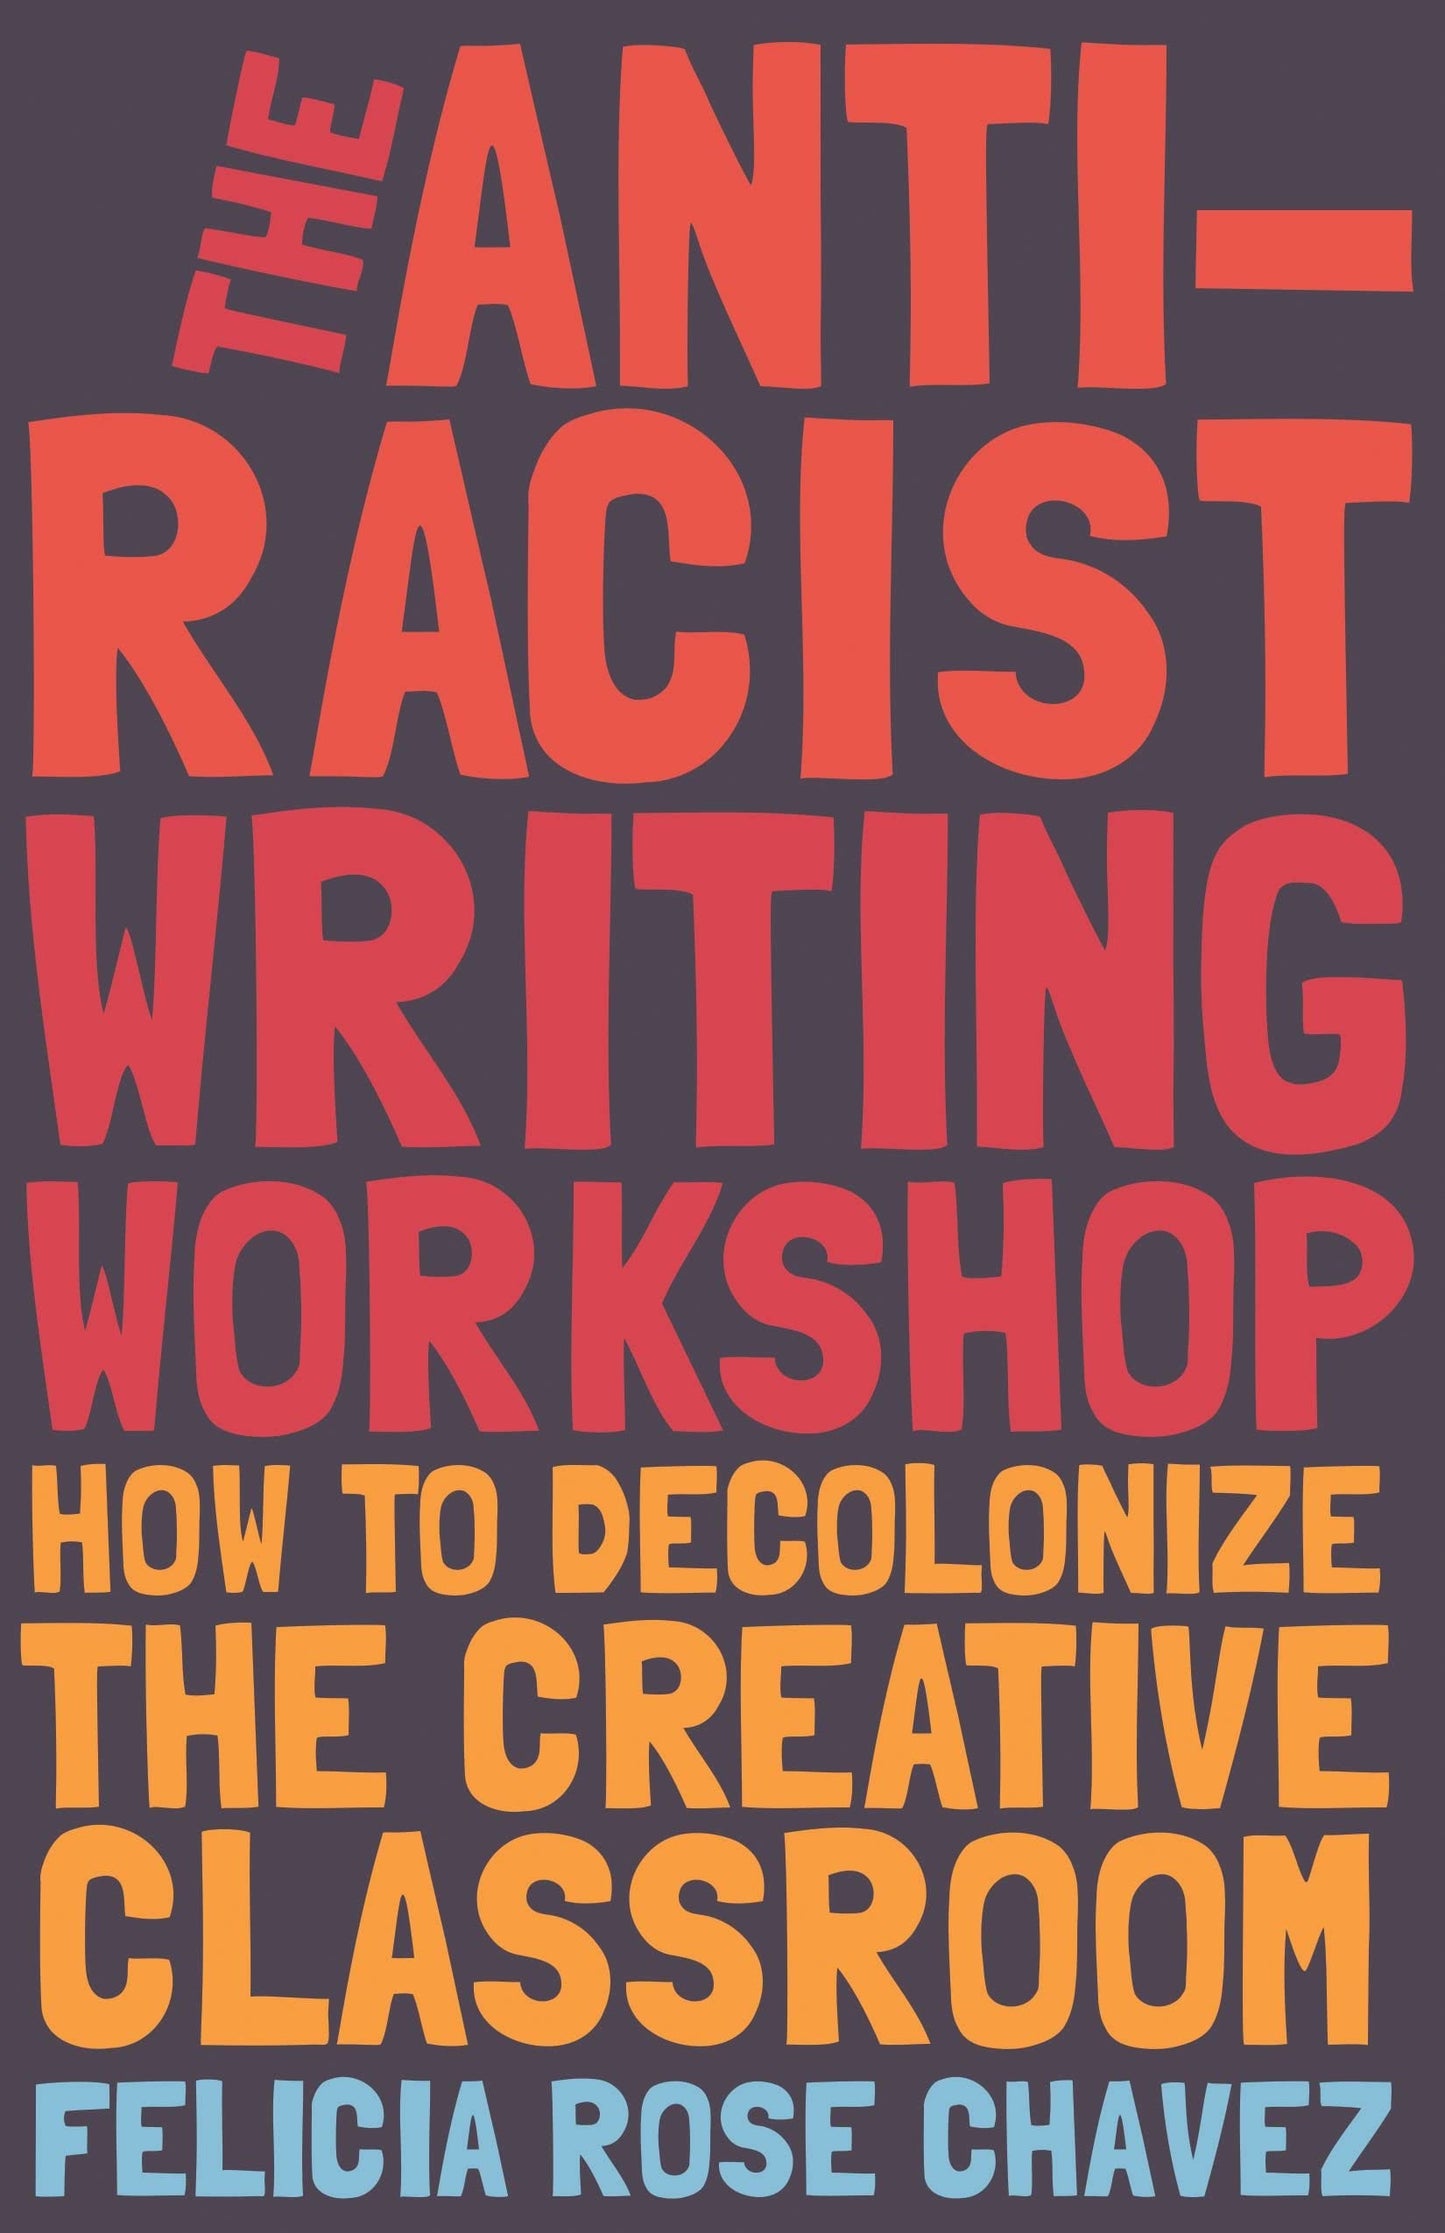 The Anti-Racist Writing Workshop, by Felicia Rose Chavez